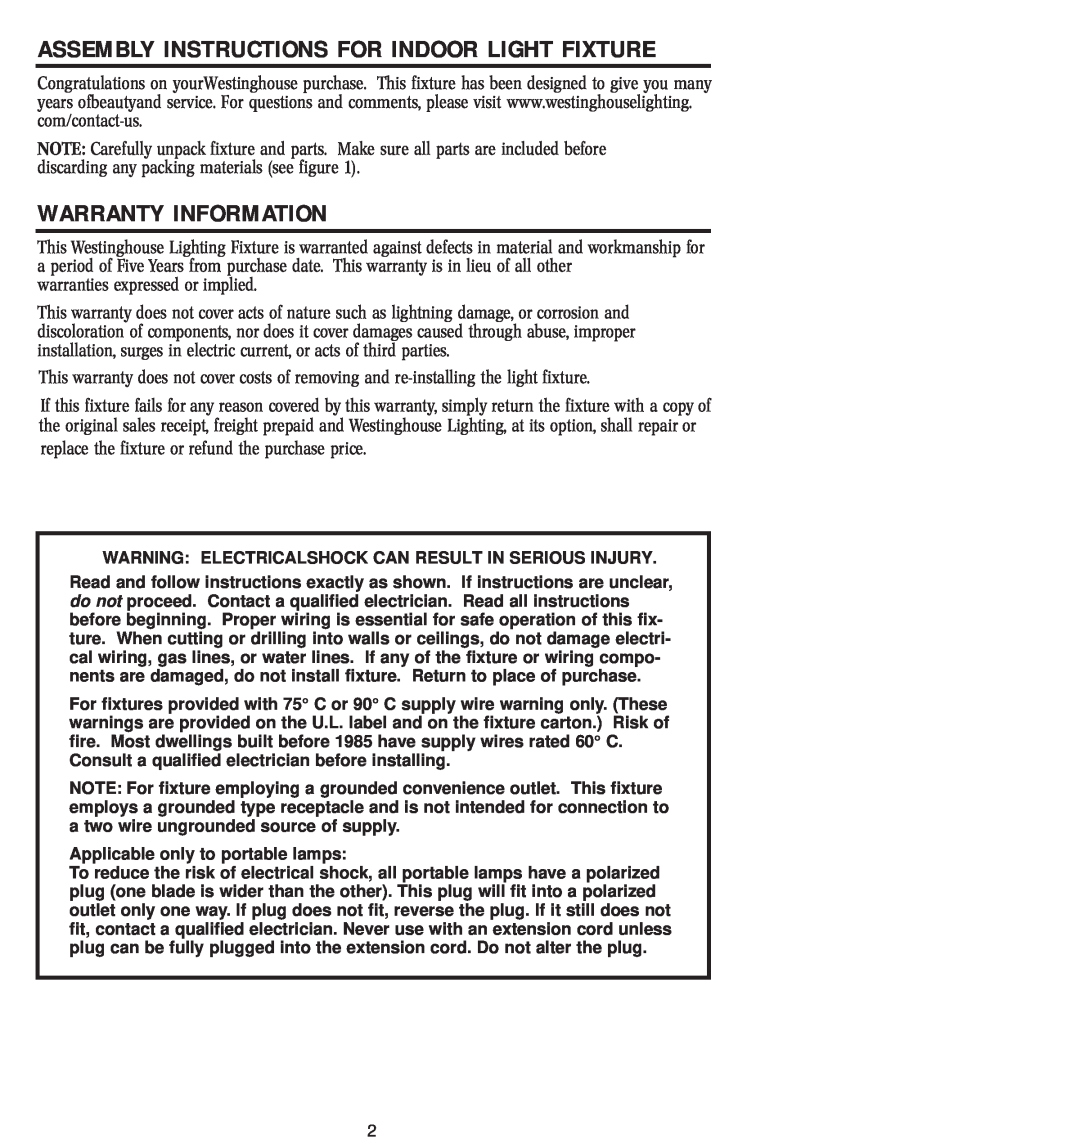 Westinghouse W-048, 60612 owner manual Warranty Information, Assembly Instructions For Indoor Light Fixture 